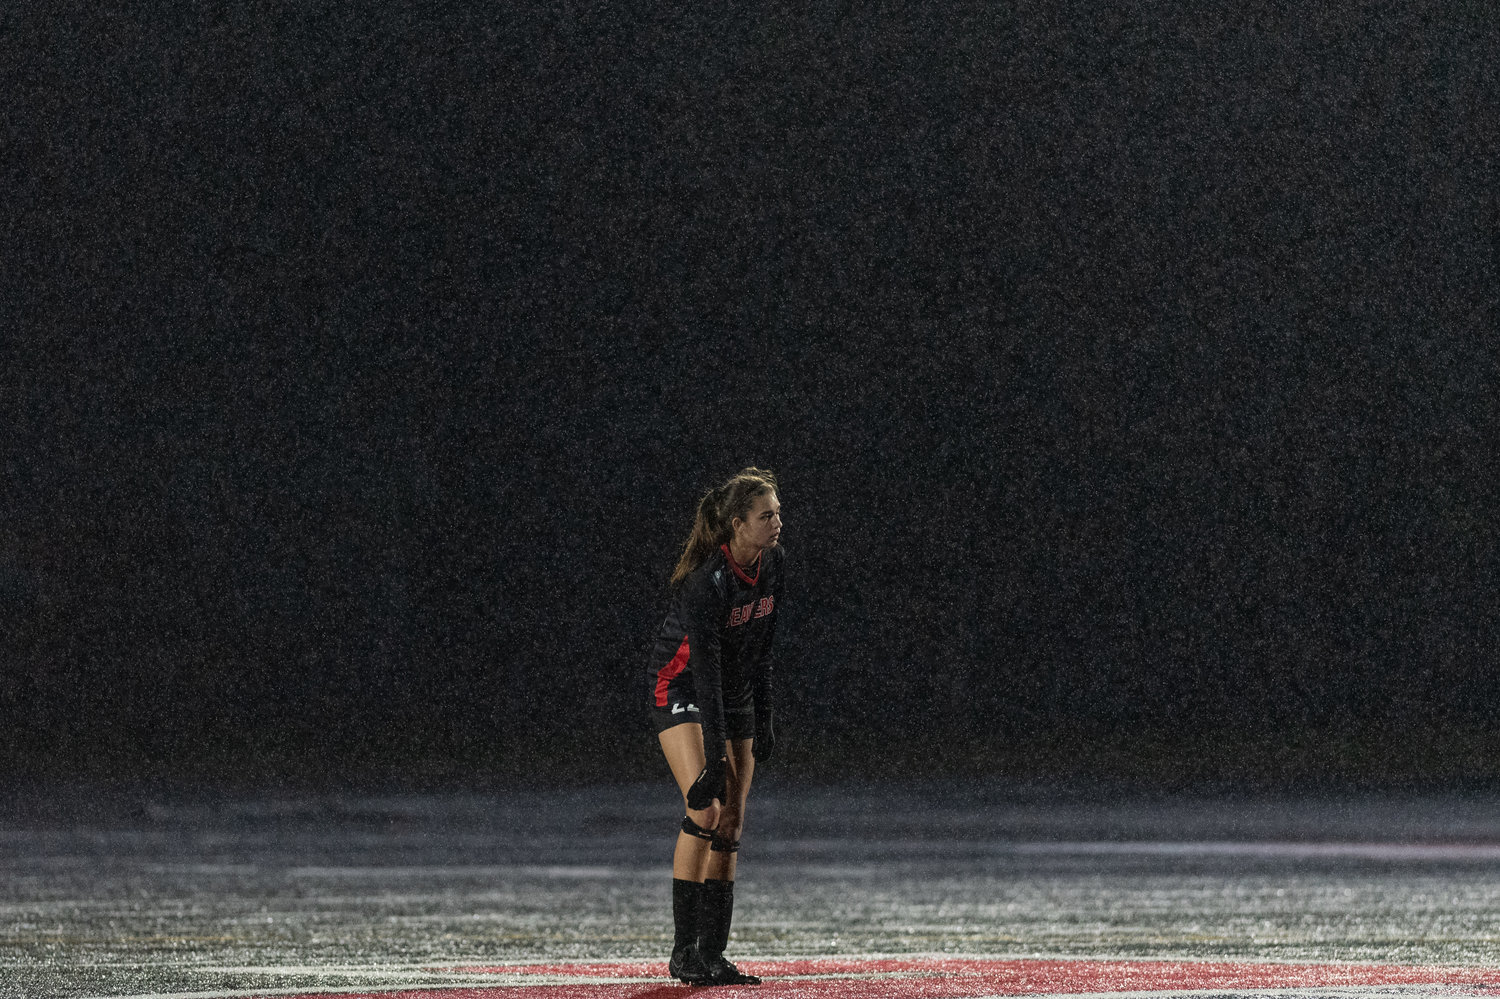 Tenino defender Ashley Schow watches a free kick in the rain against Montesano Oct. 14